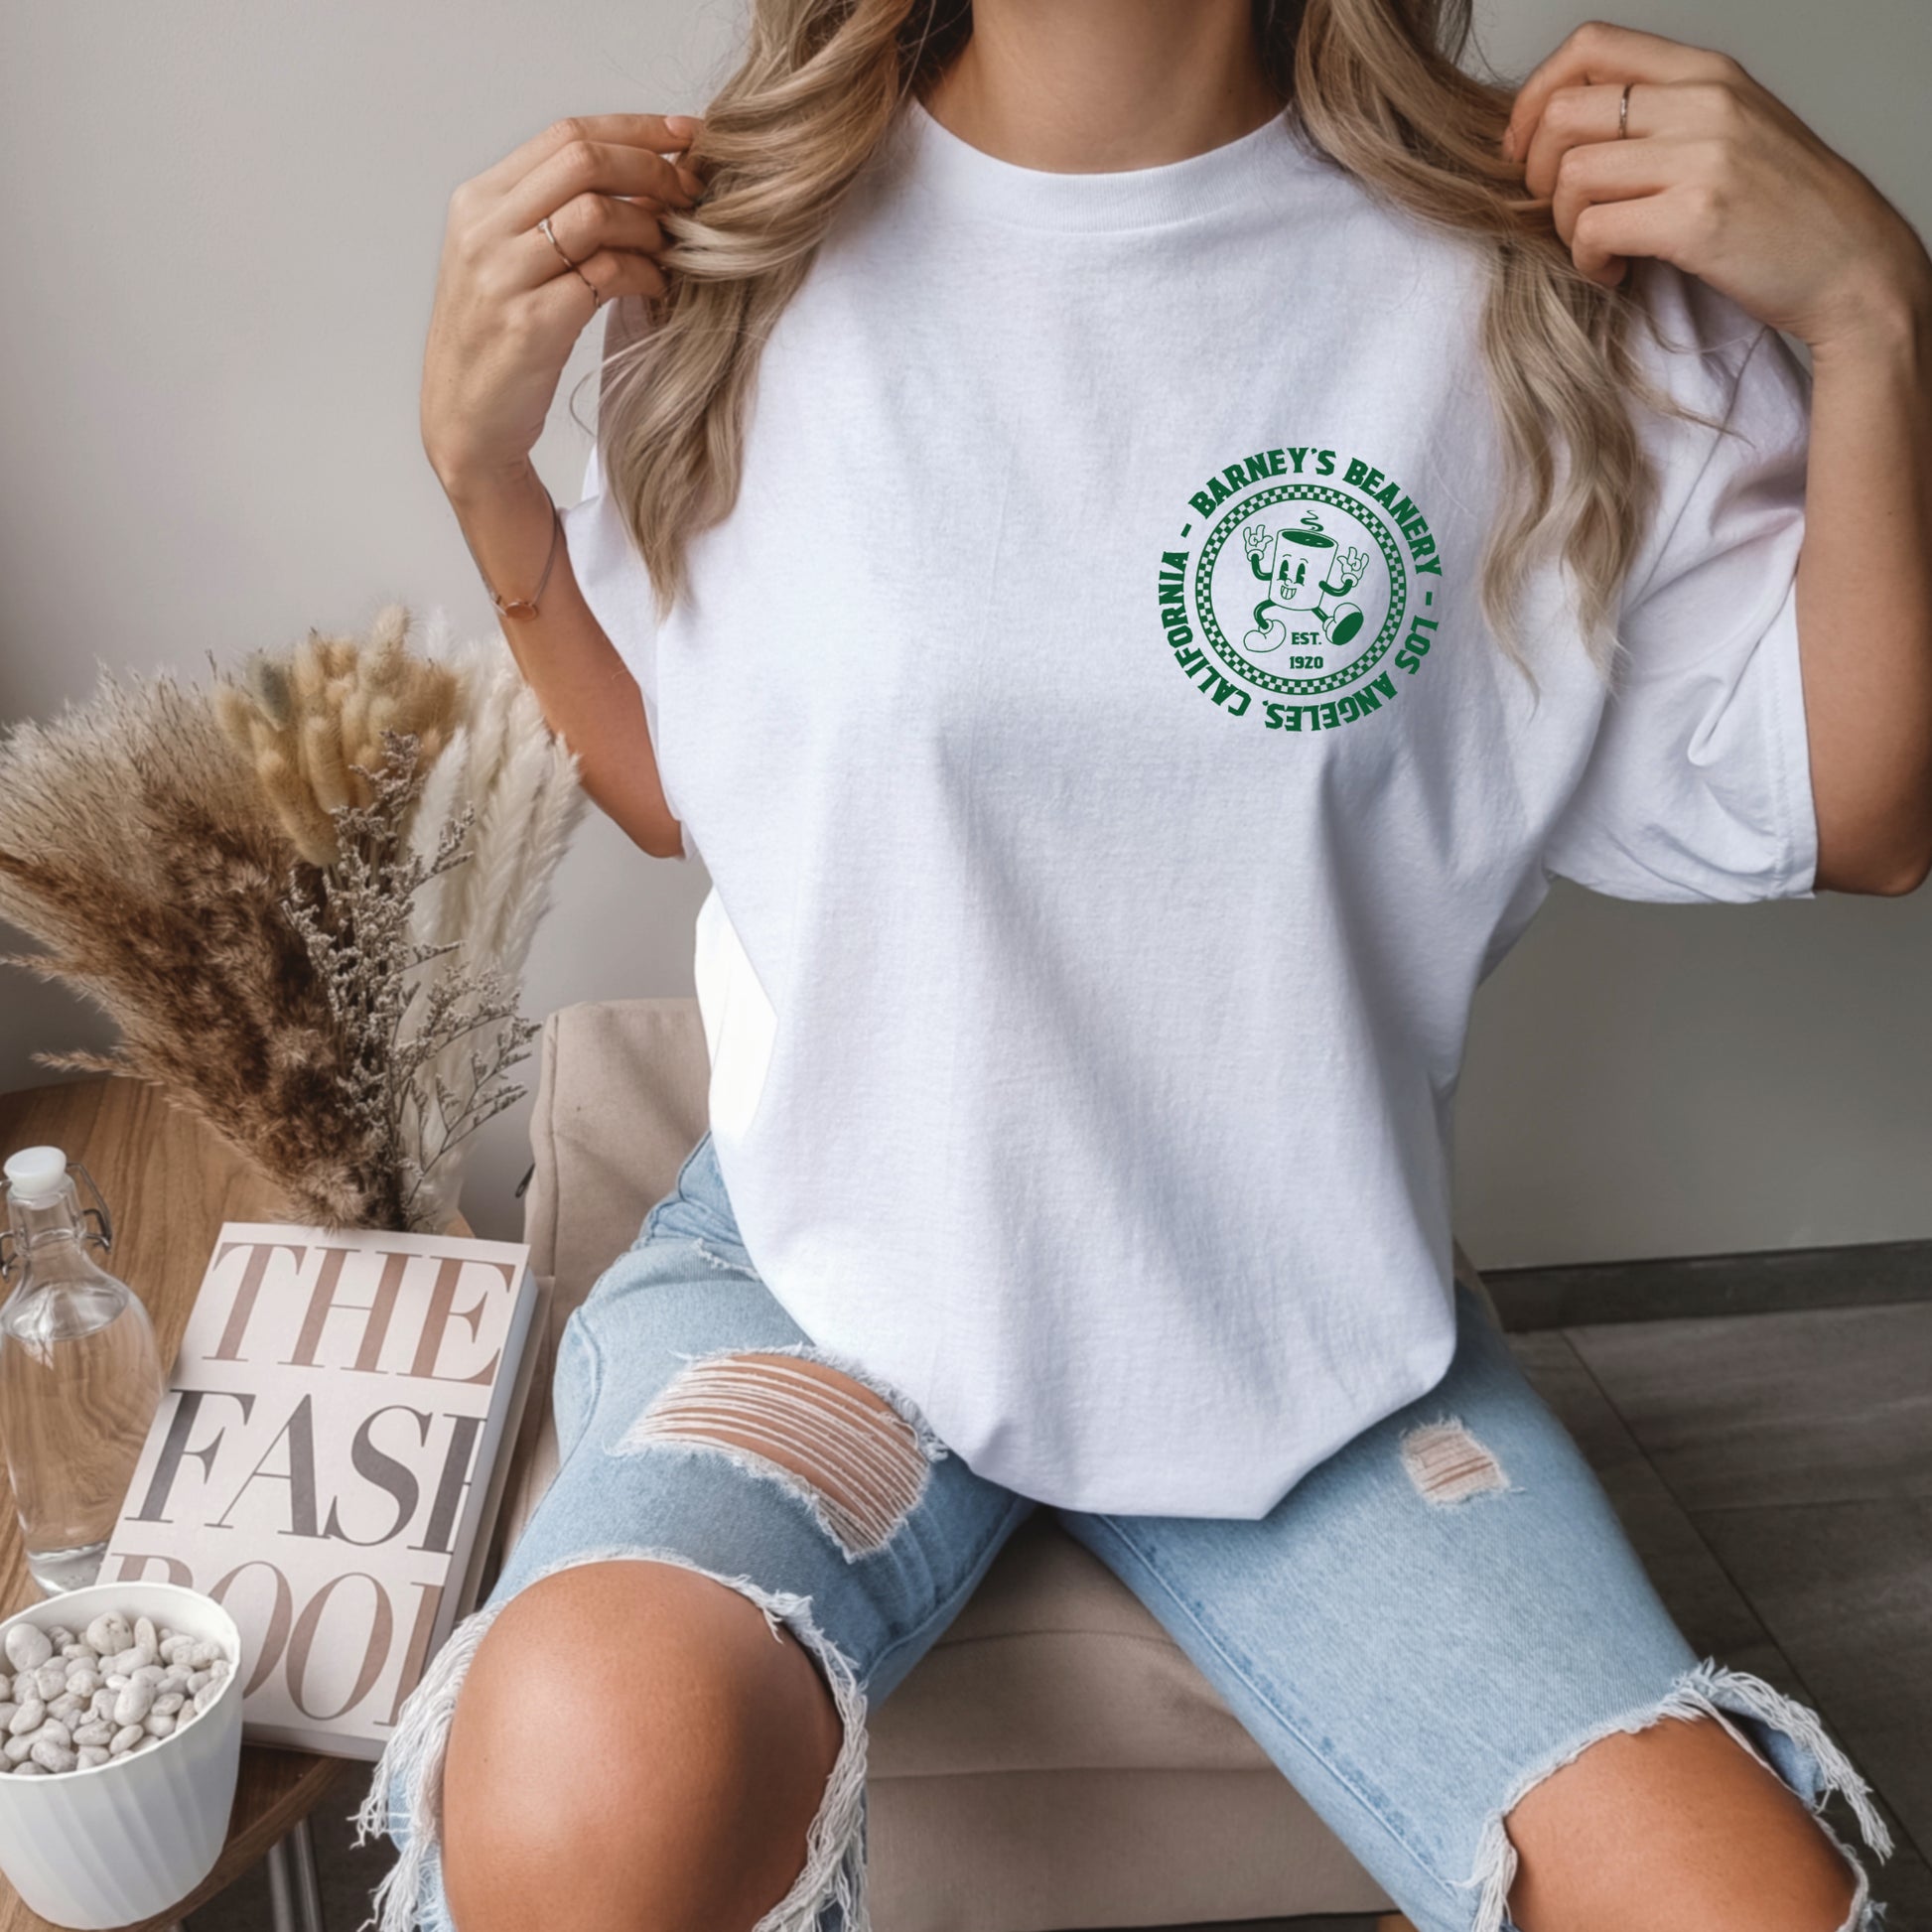 Eat More Chili. Drink More Beer. | BARNEY'S BEANERY - Women's Retro Graphic Tee | White Comfort Colors 1717 T-Shirt - Green Badge Graphic On Front View Of Female Lifestyle Image